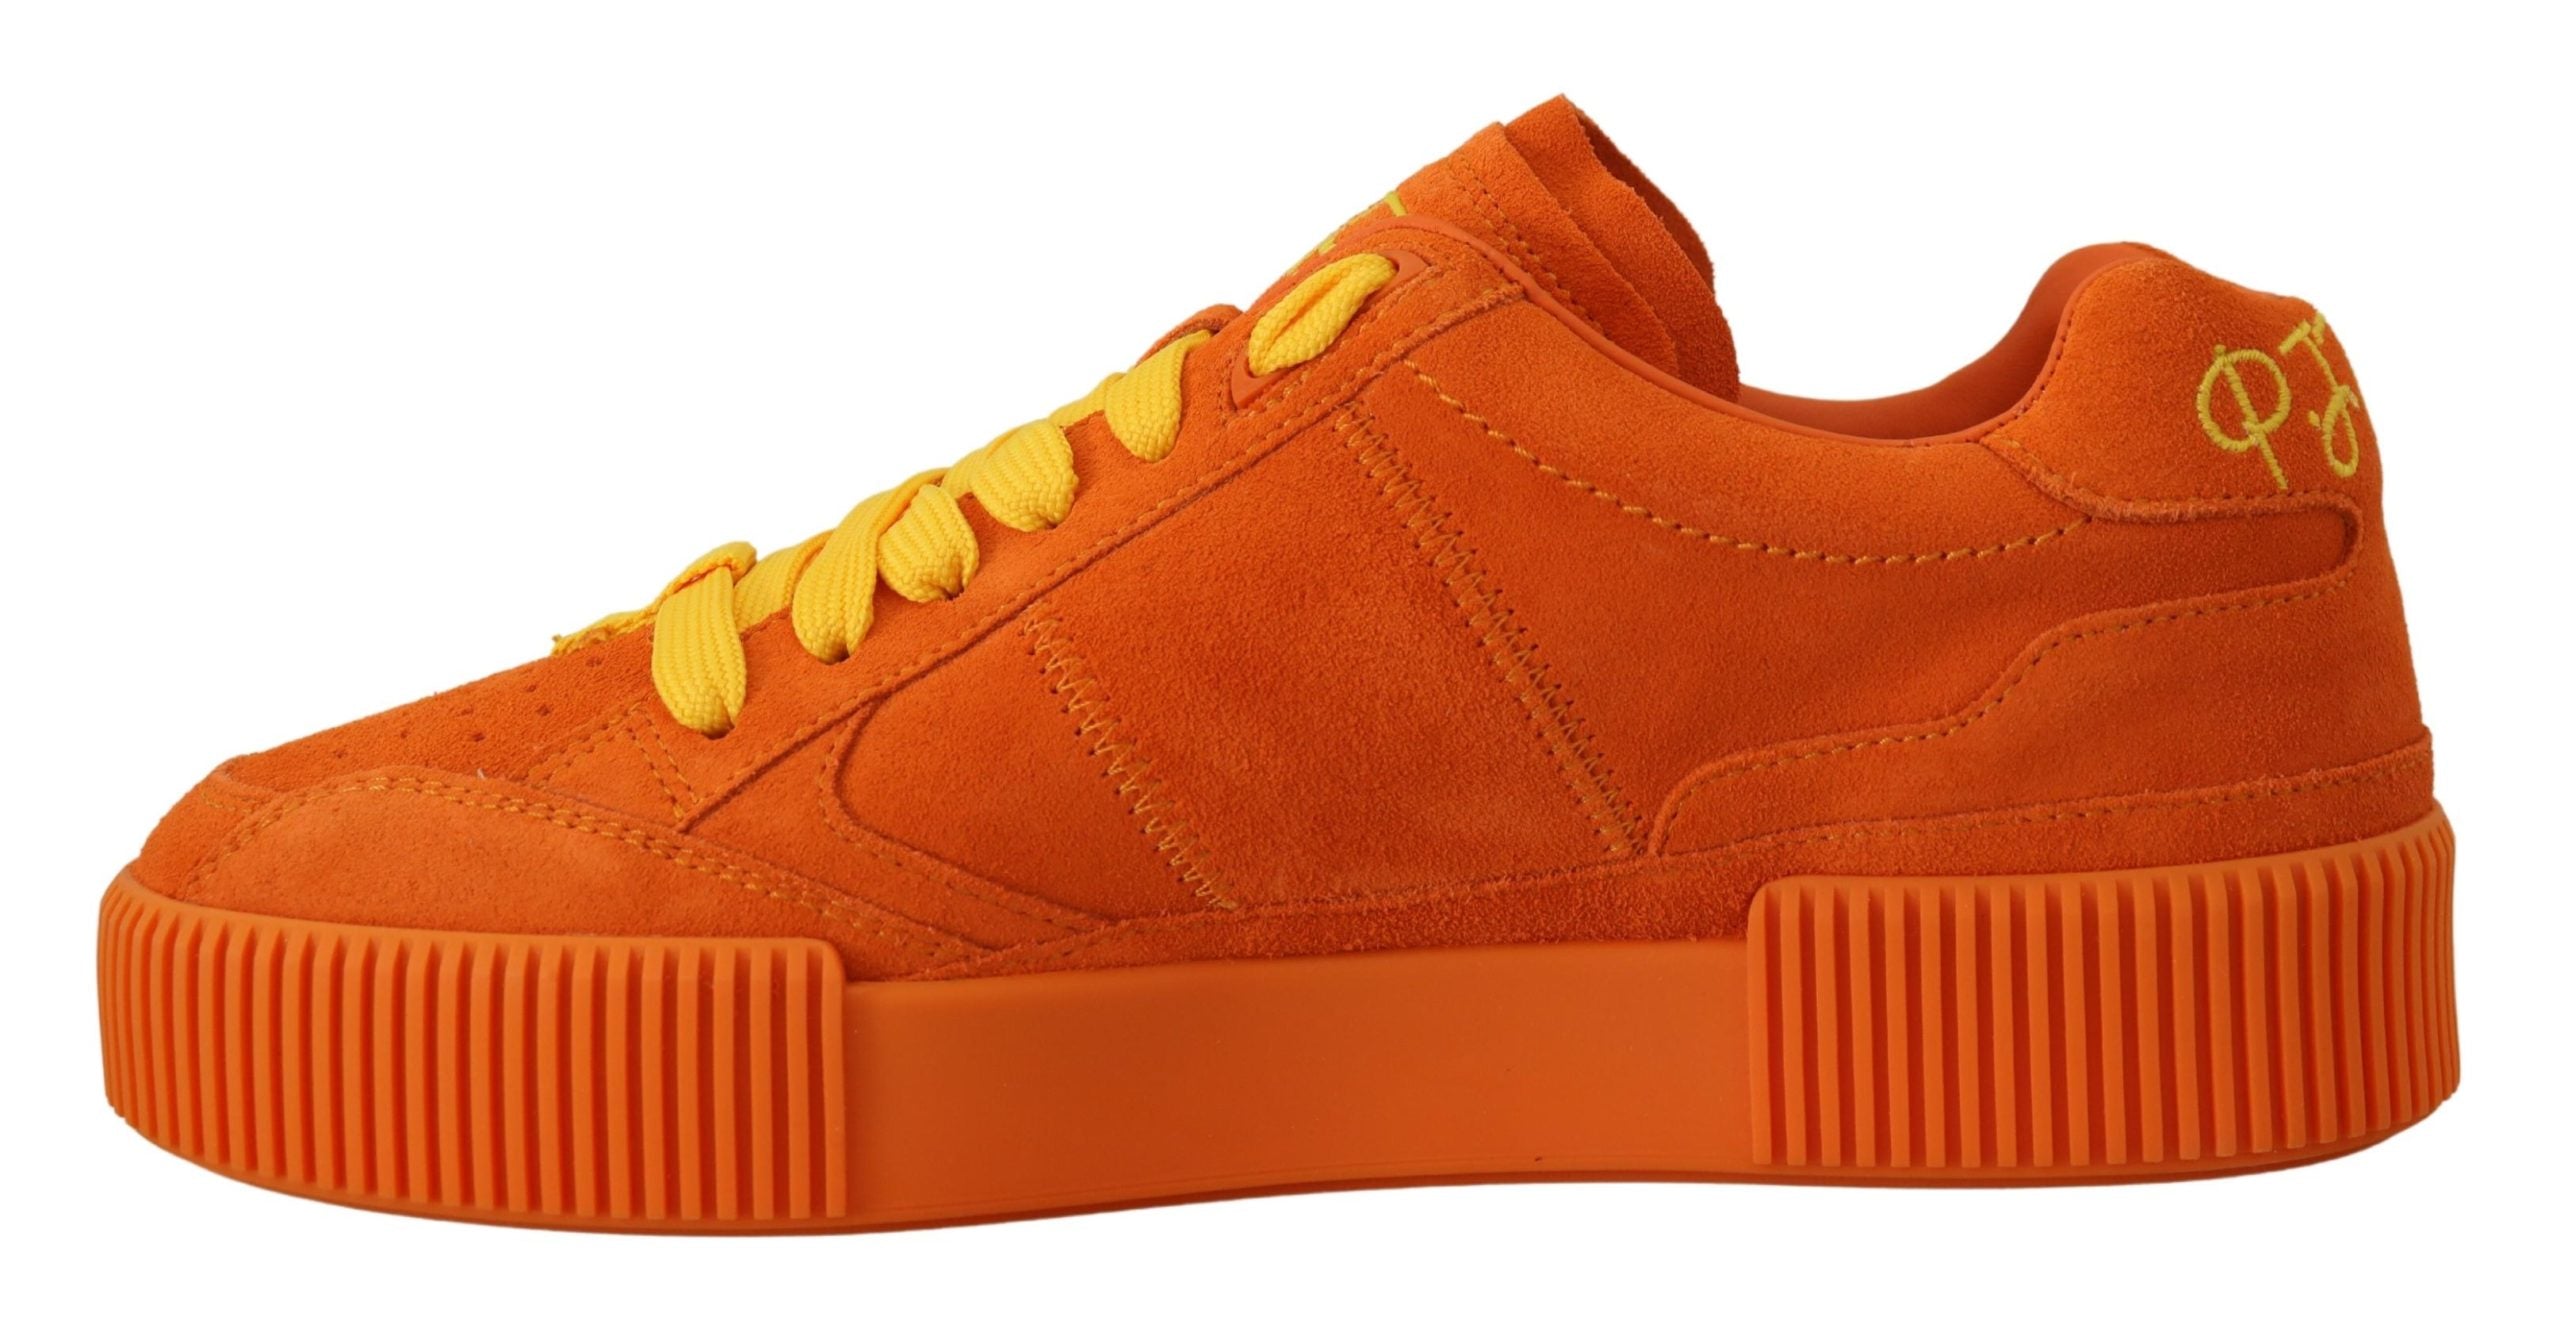 Dolce & Gabbana Chic Orange Suede Lace-Up Sneakers